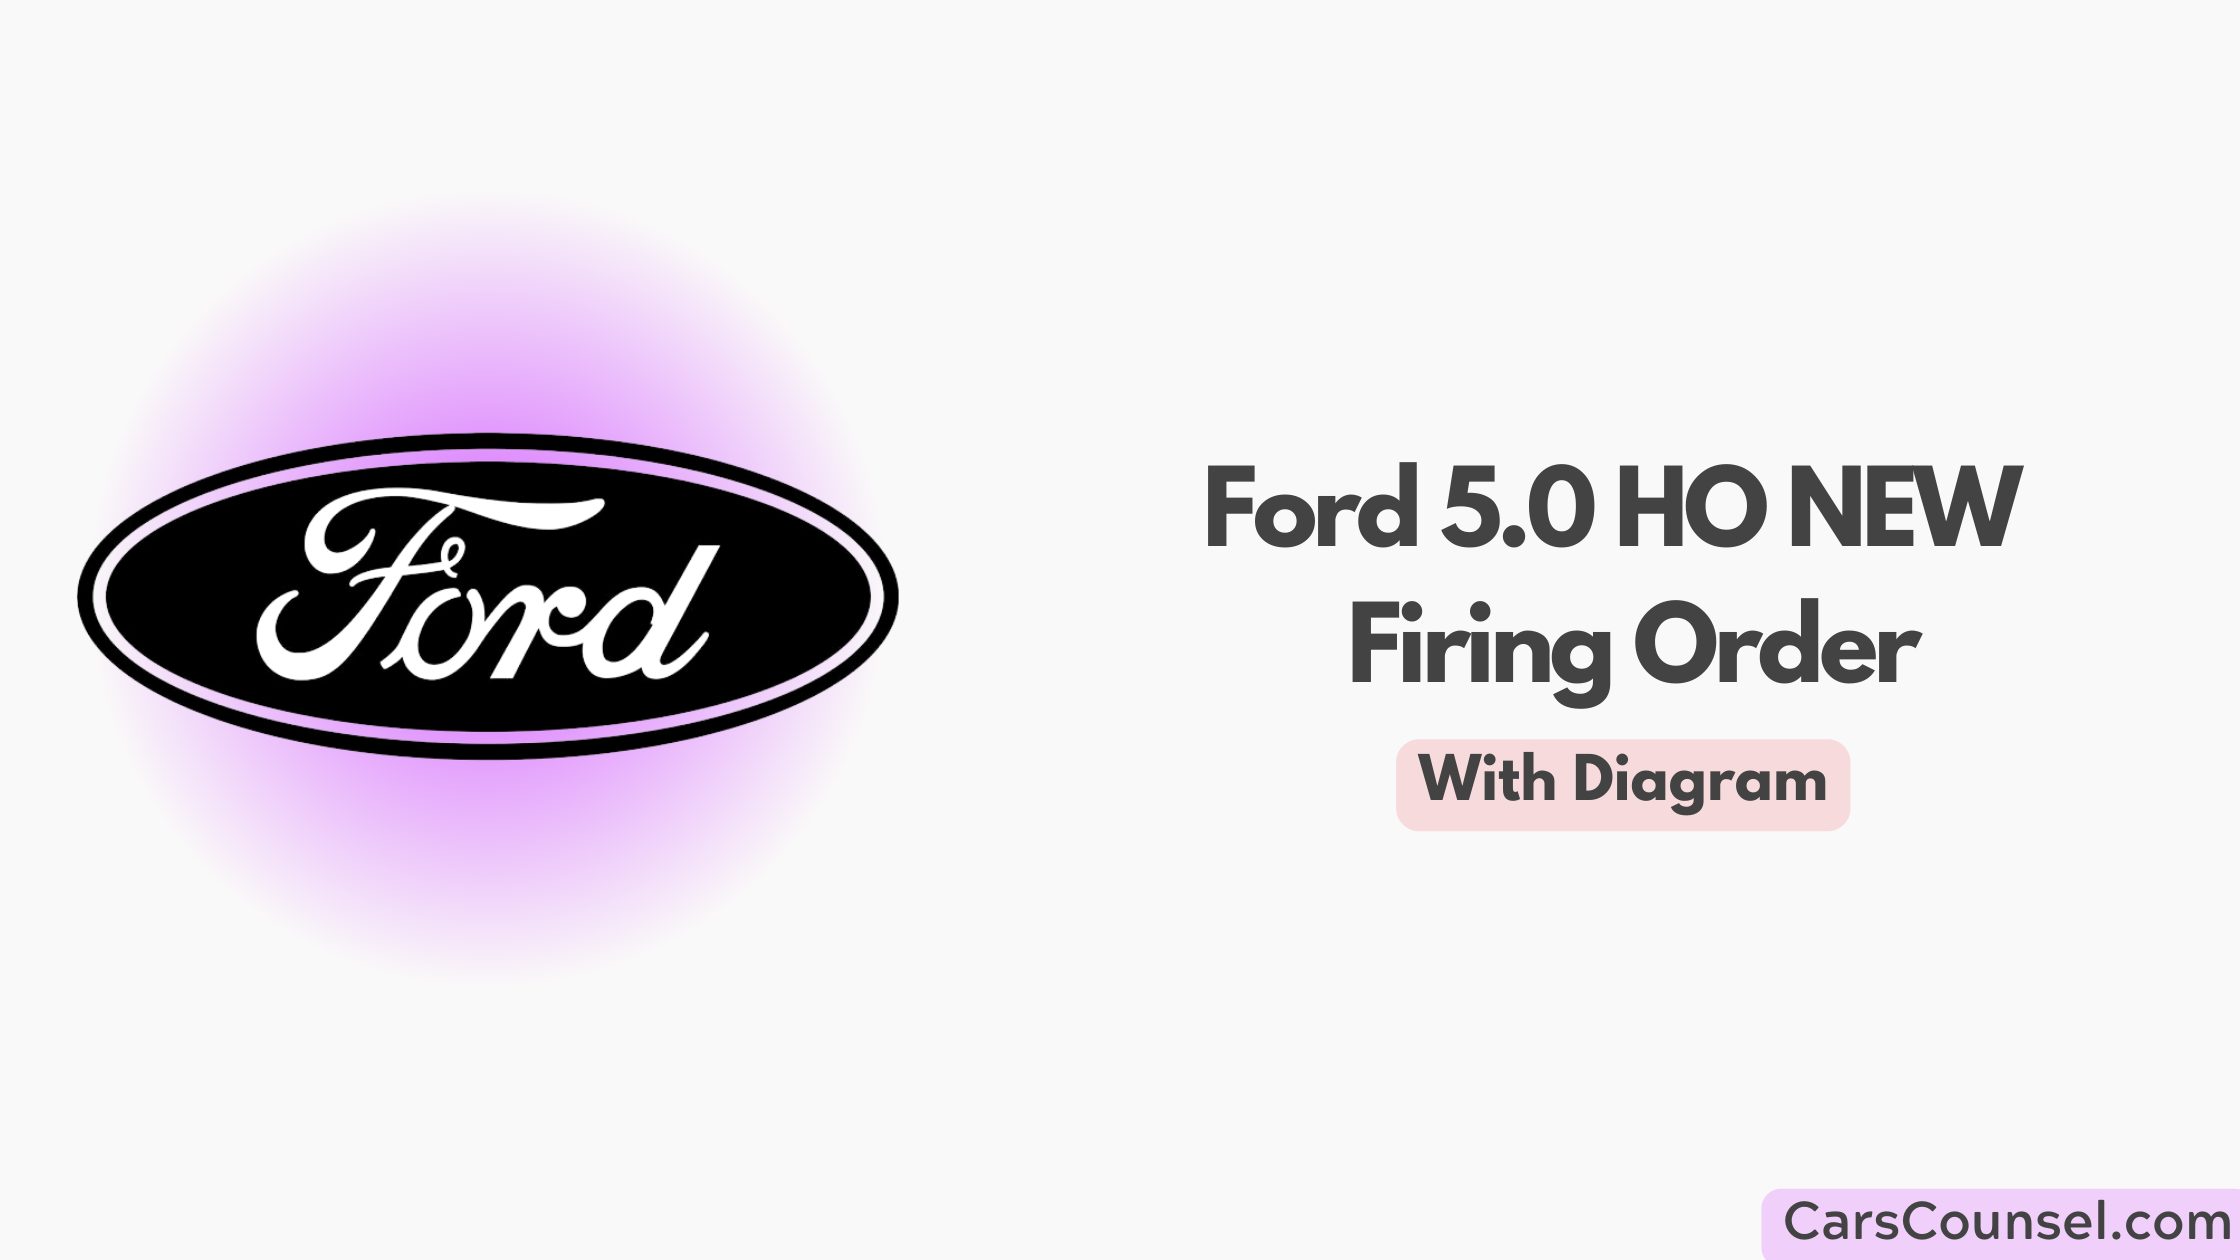 Ford 5.0 Ho New Firing Order With Diagram